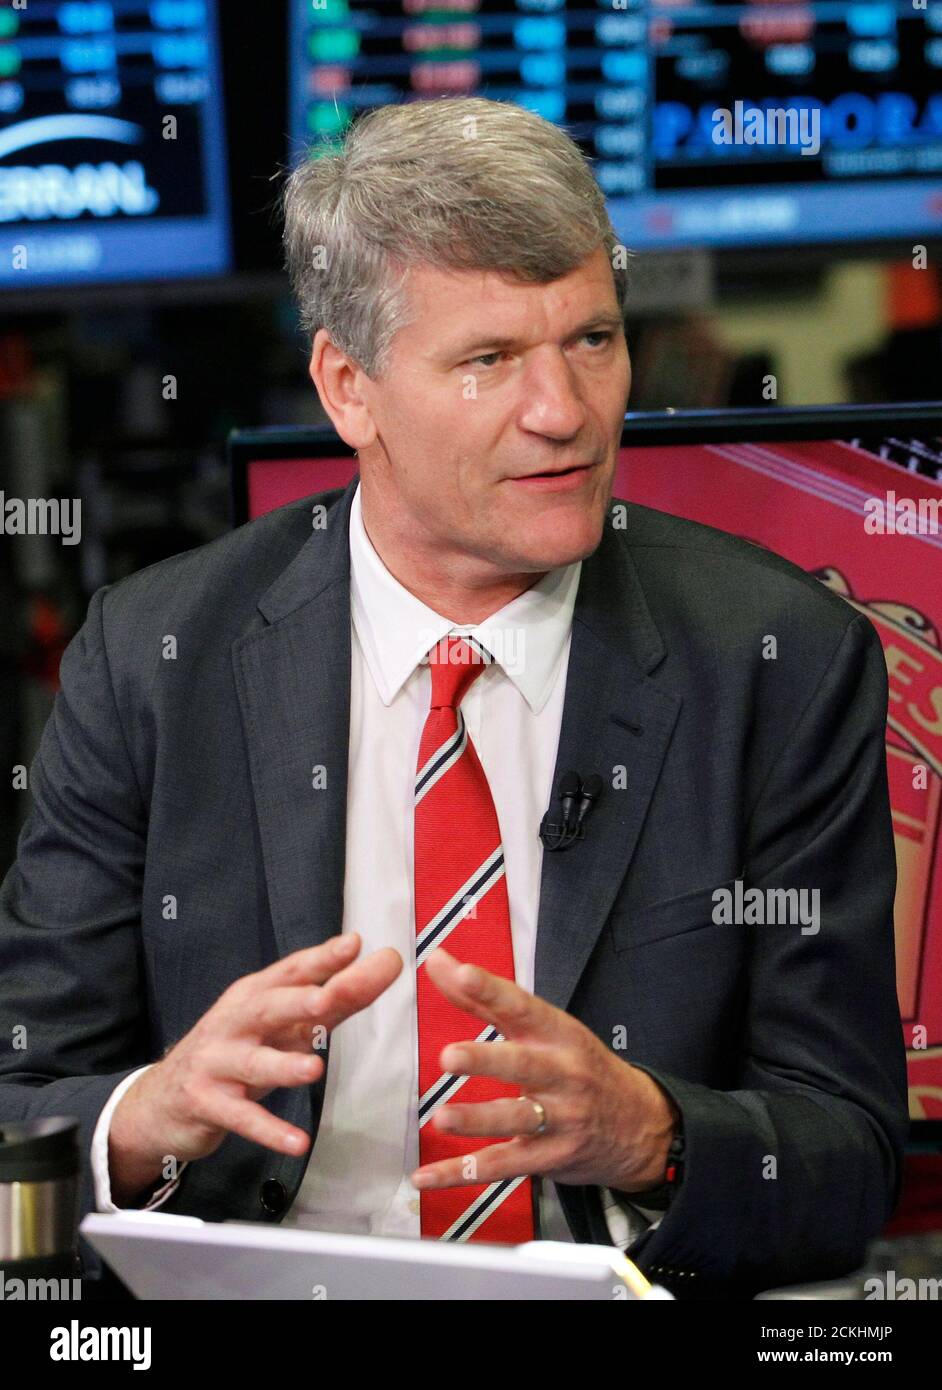 Manchester United CEO David Gill gives an interview following Manchester United Ltd initial public offering on the floor of the New York Stock Exchange, August 10, 2012. Shares in Manchester United priced below expectations and were essentially flat in early trading on Friday, a disappointing stock market debut for the world's most famous soccer club and most valuable sporting team. REUTERS/Brendan McDermid (UNITED STATES - Tags: BUSINESS SPORT SOCCER) Stock Photo